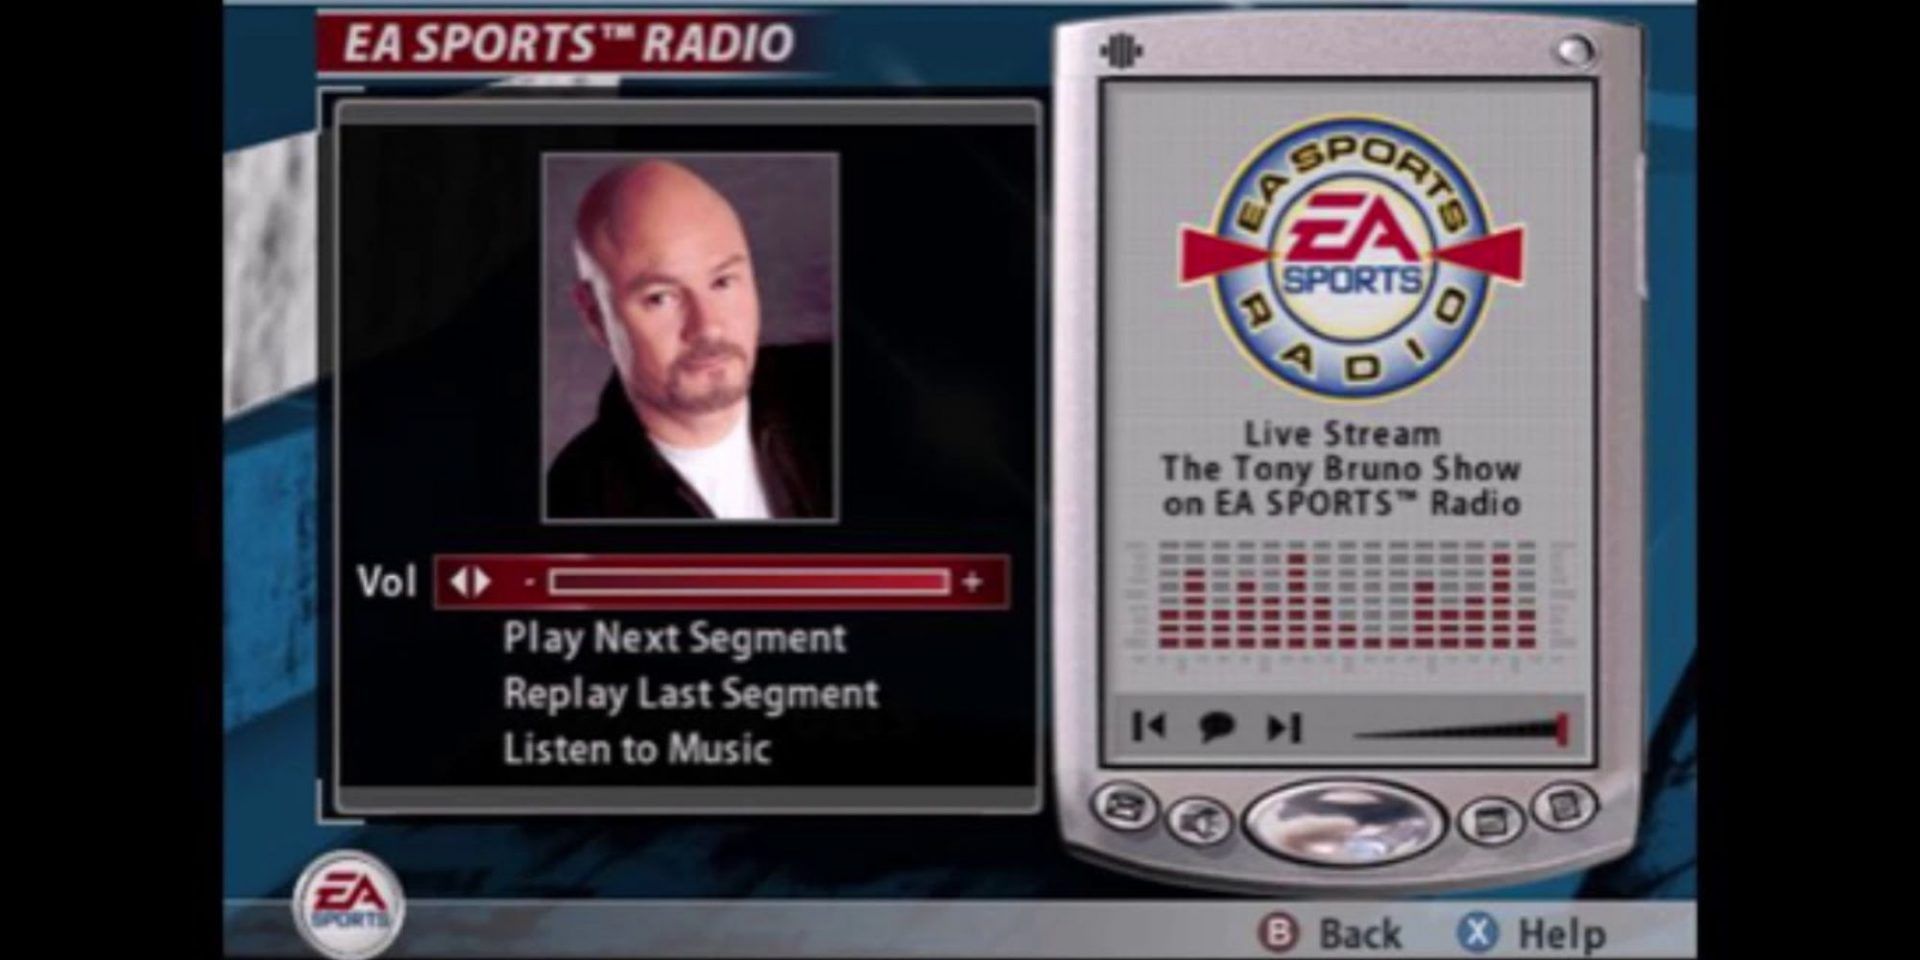 Radio Host Tony Bruno performing his weekly show in Madden